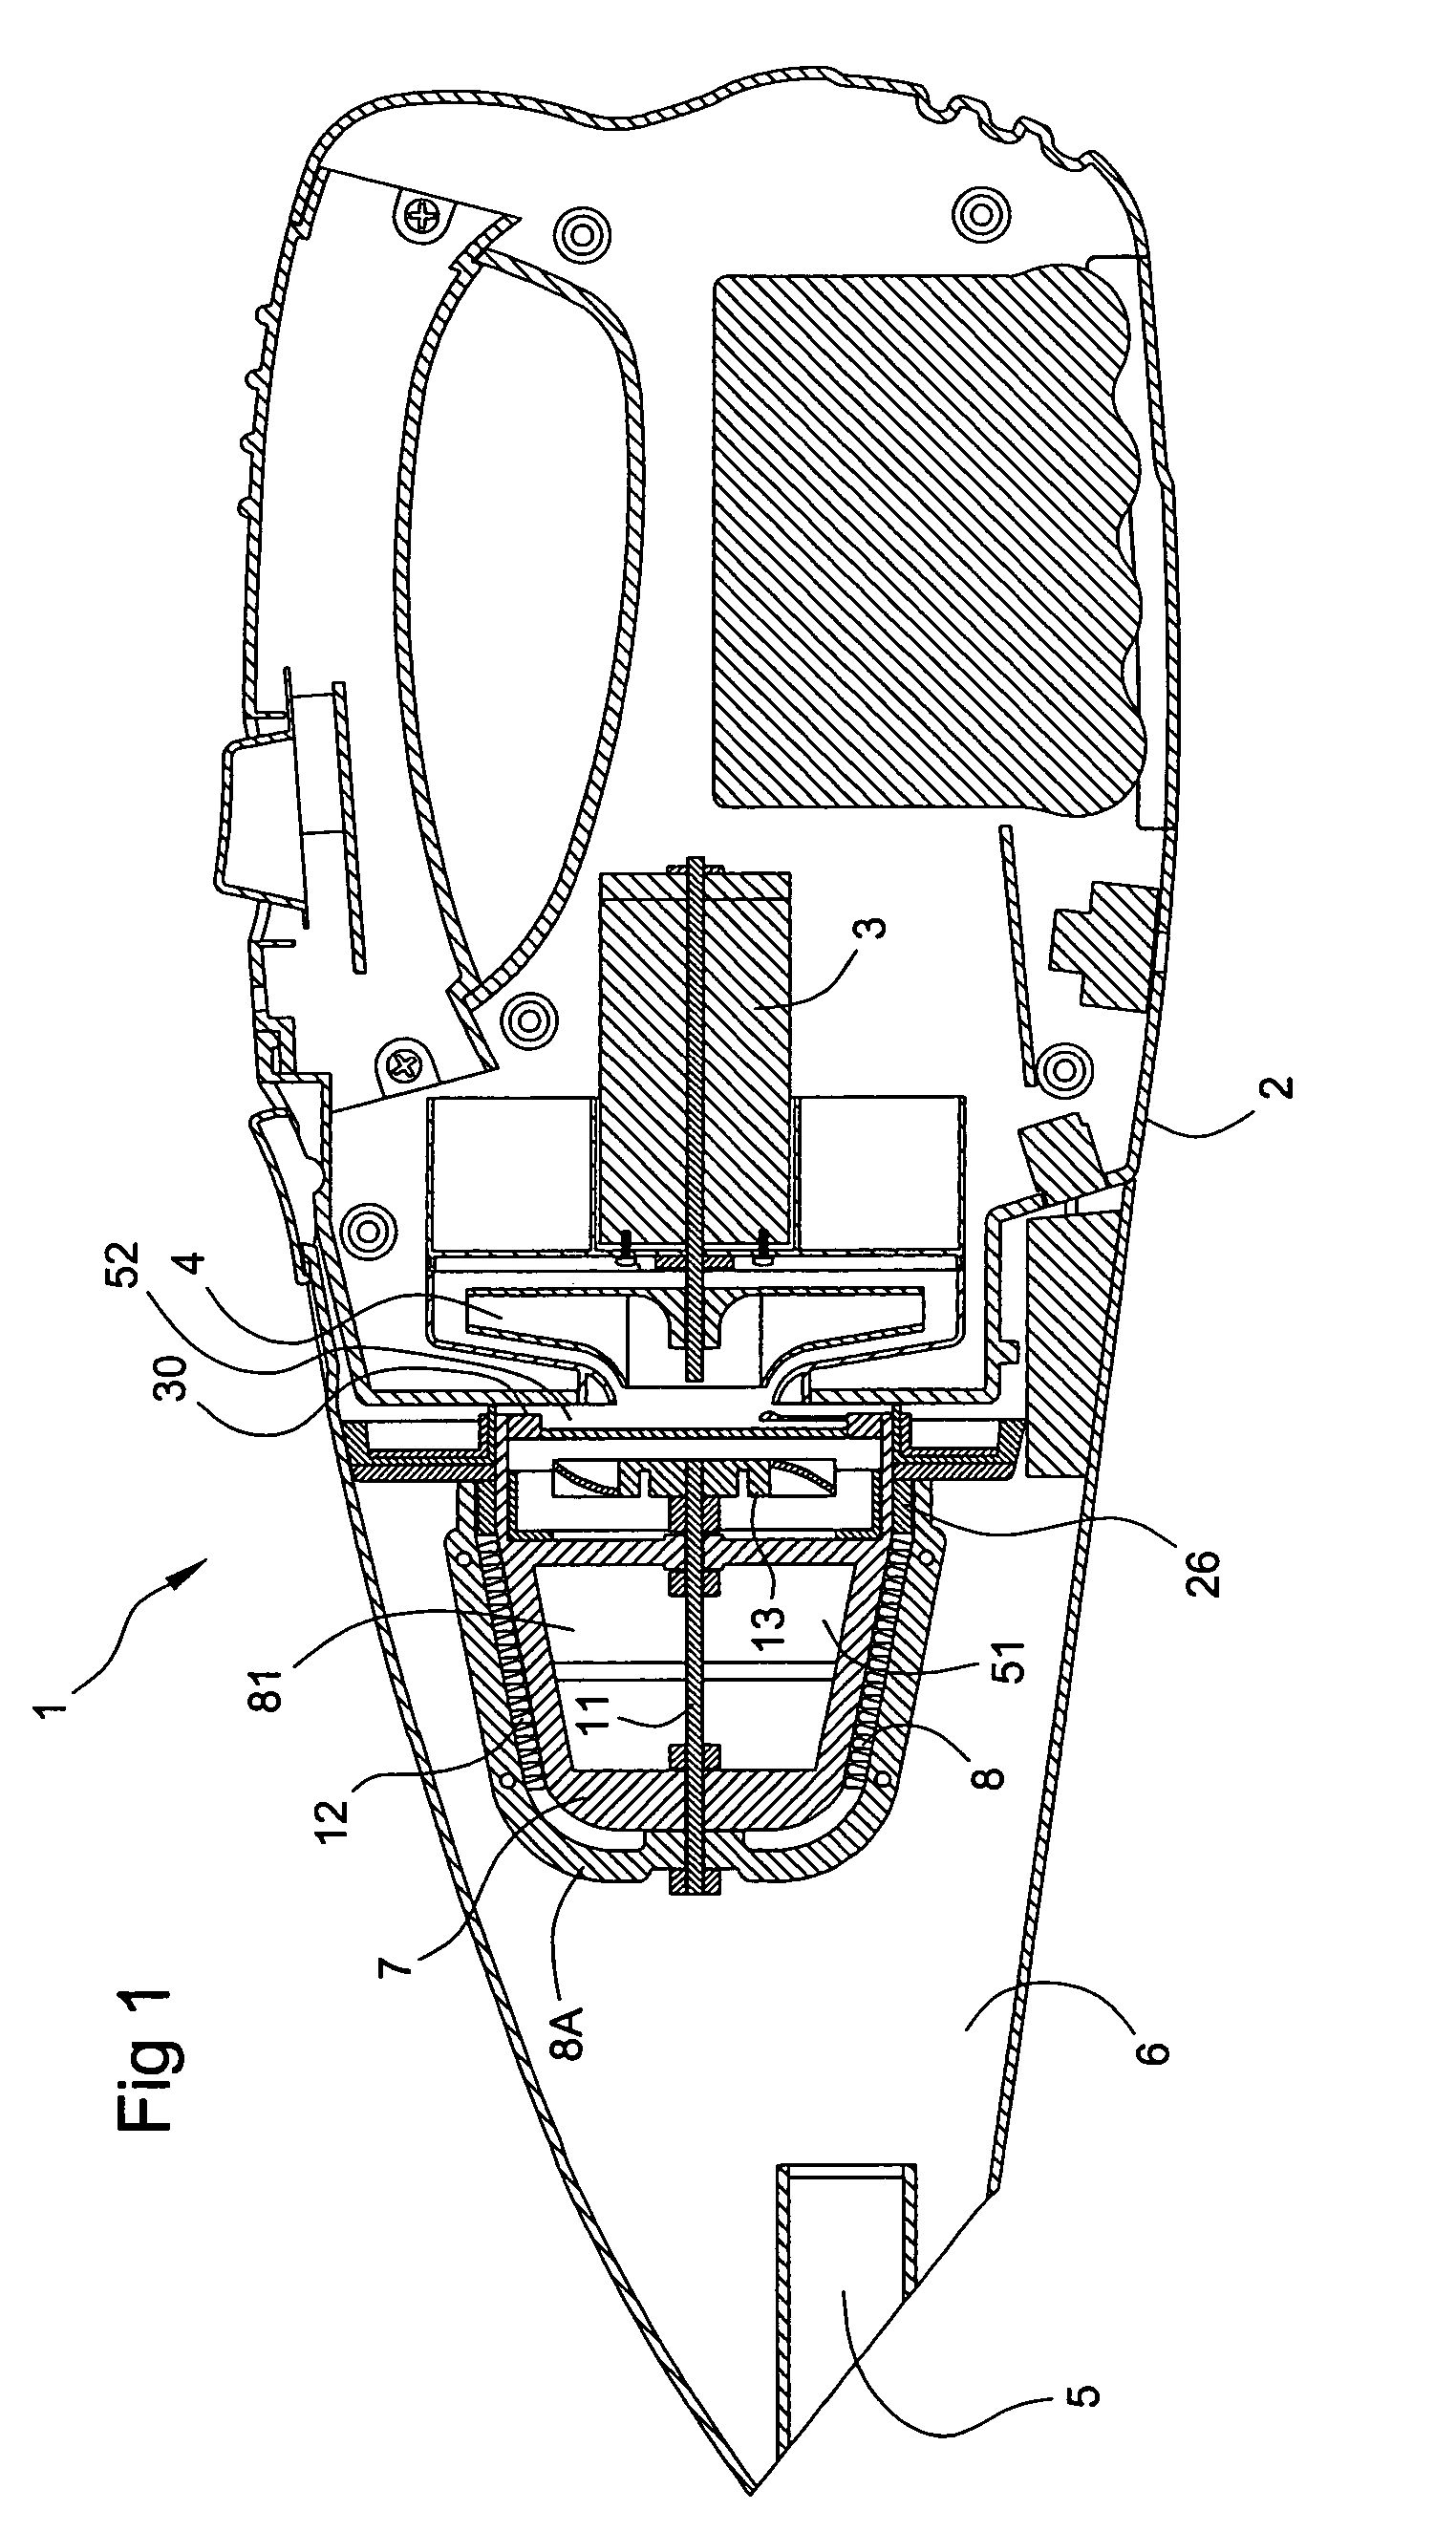 Self cleaning filter and vacuum incorporating same